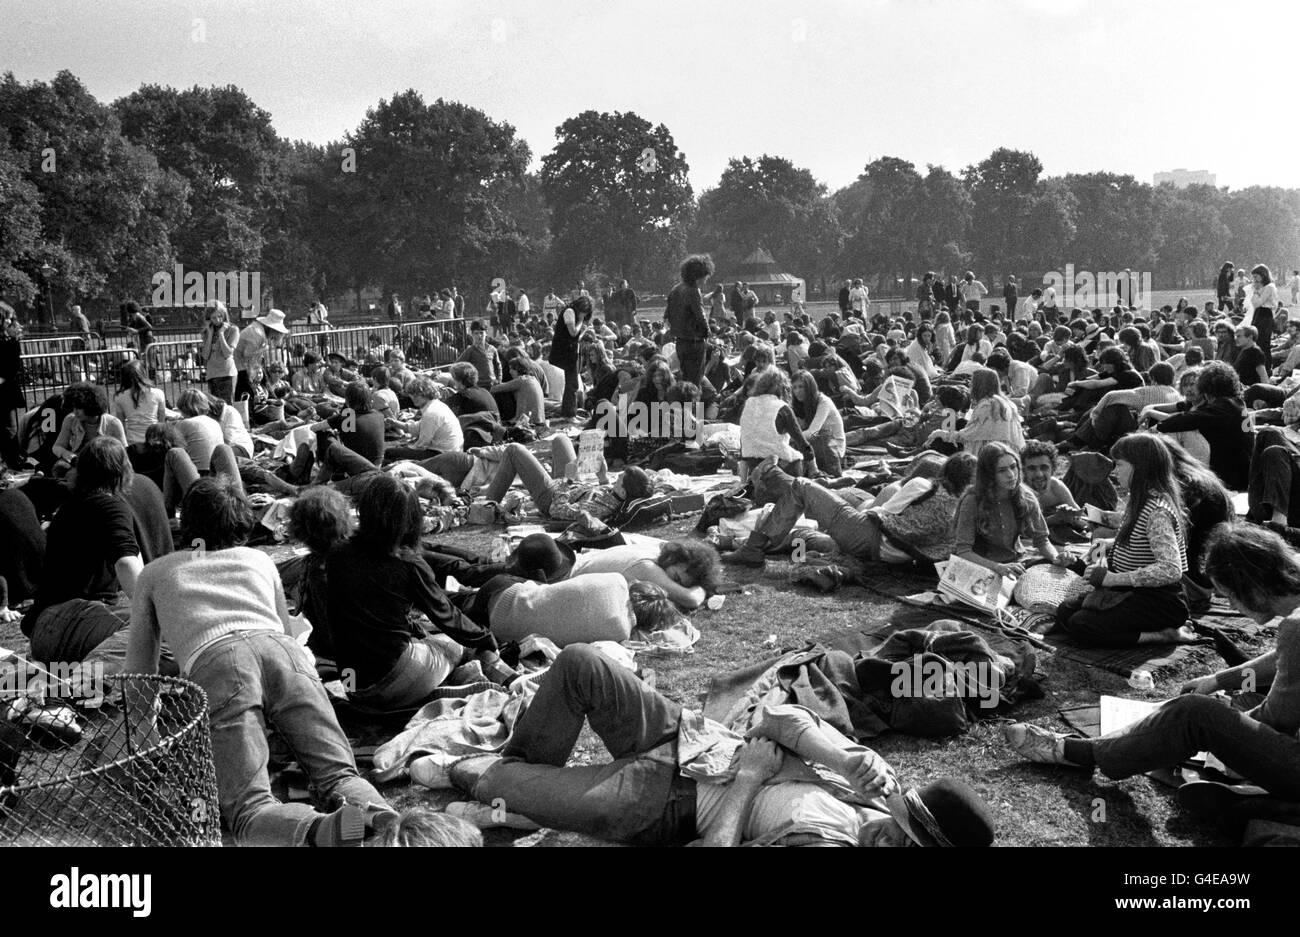 A GENERAL VIEW OF THE AREA NEAR SPEAKER'S CORNER, HYDE PARK, LONDON OF EARLY ARRIVALS ATTENDING A POP CONCERT THAT WAS THE LAST OF THE YEARS FREE OPEN-AIR CONCERTS IN THE PARK. Stock Photo